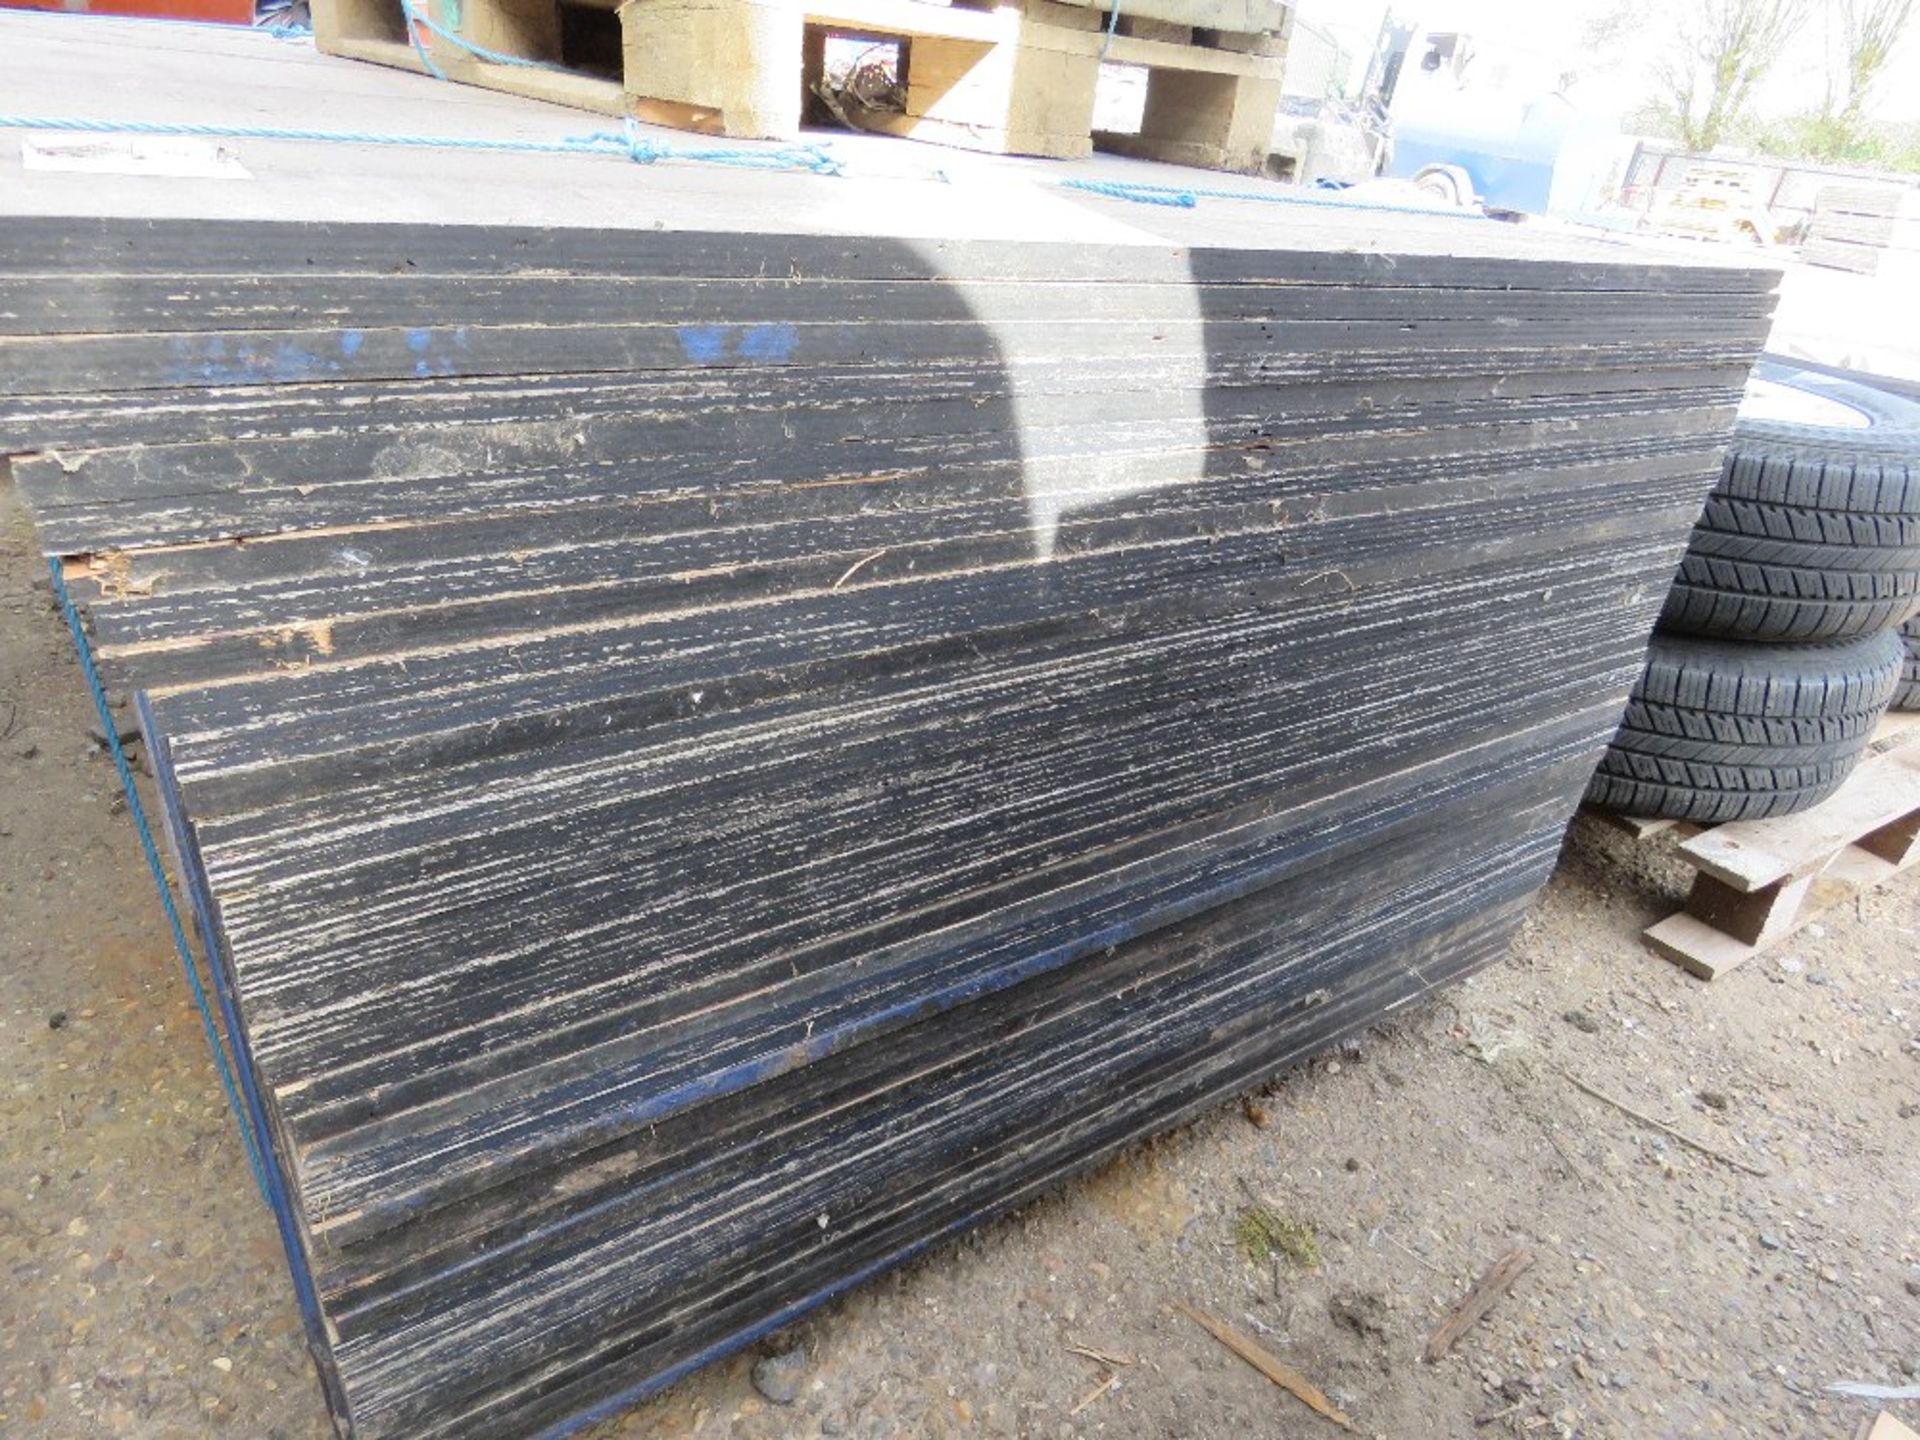 BUNDLE OF 40NO SHEETS OF 18MM PLYWOOD, BLUE PAINTED ON ONE SITE, DIRECT FROM SITE CLEARANCE. THI - Image 2 of 3